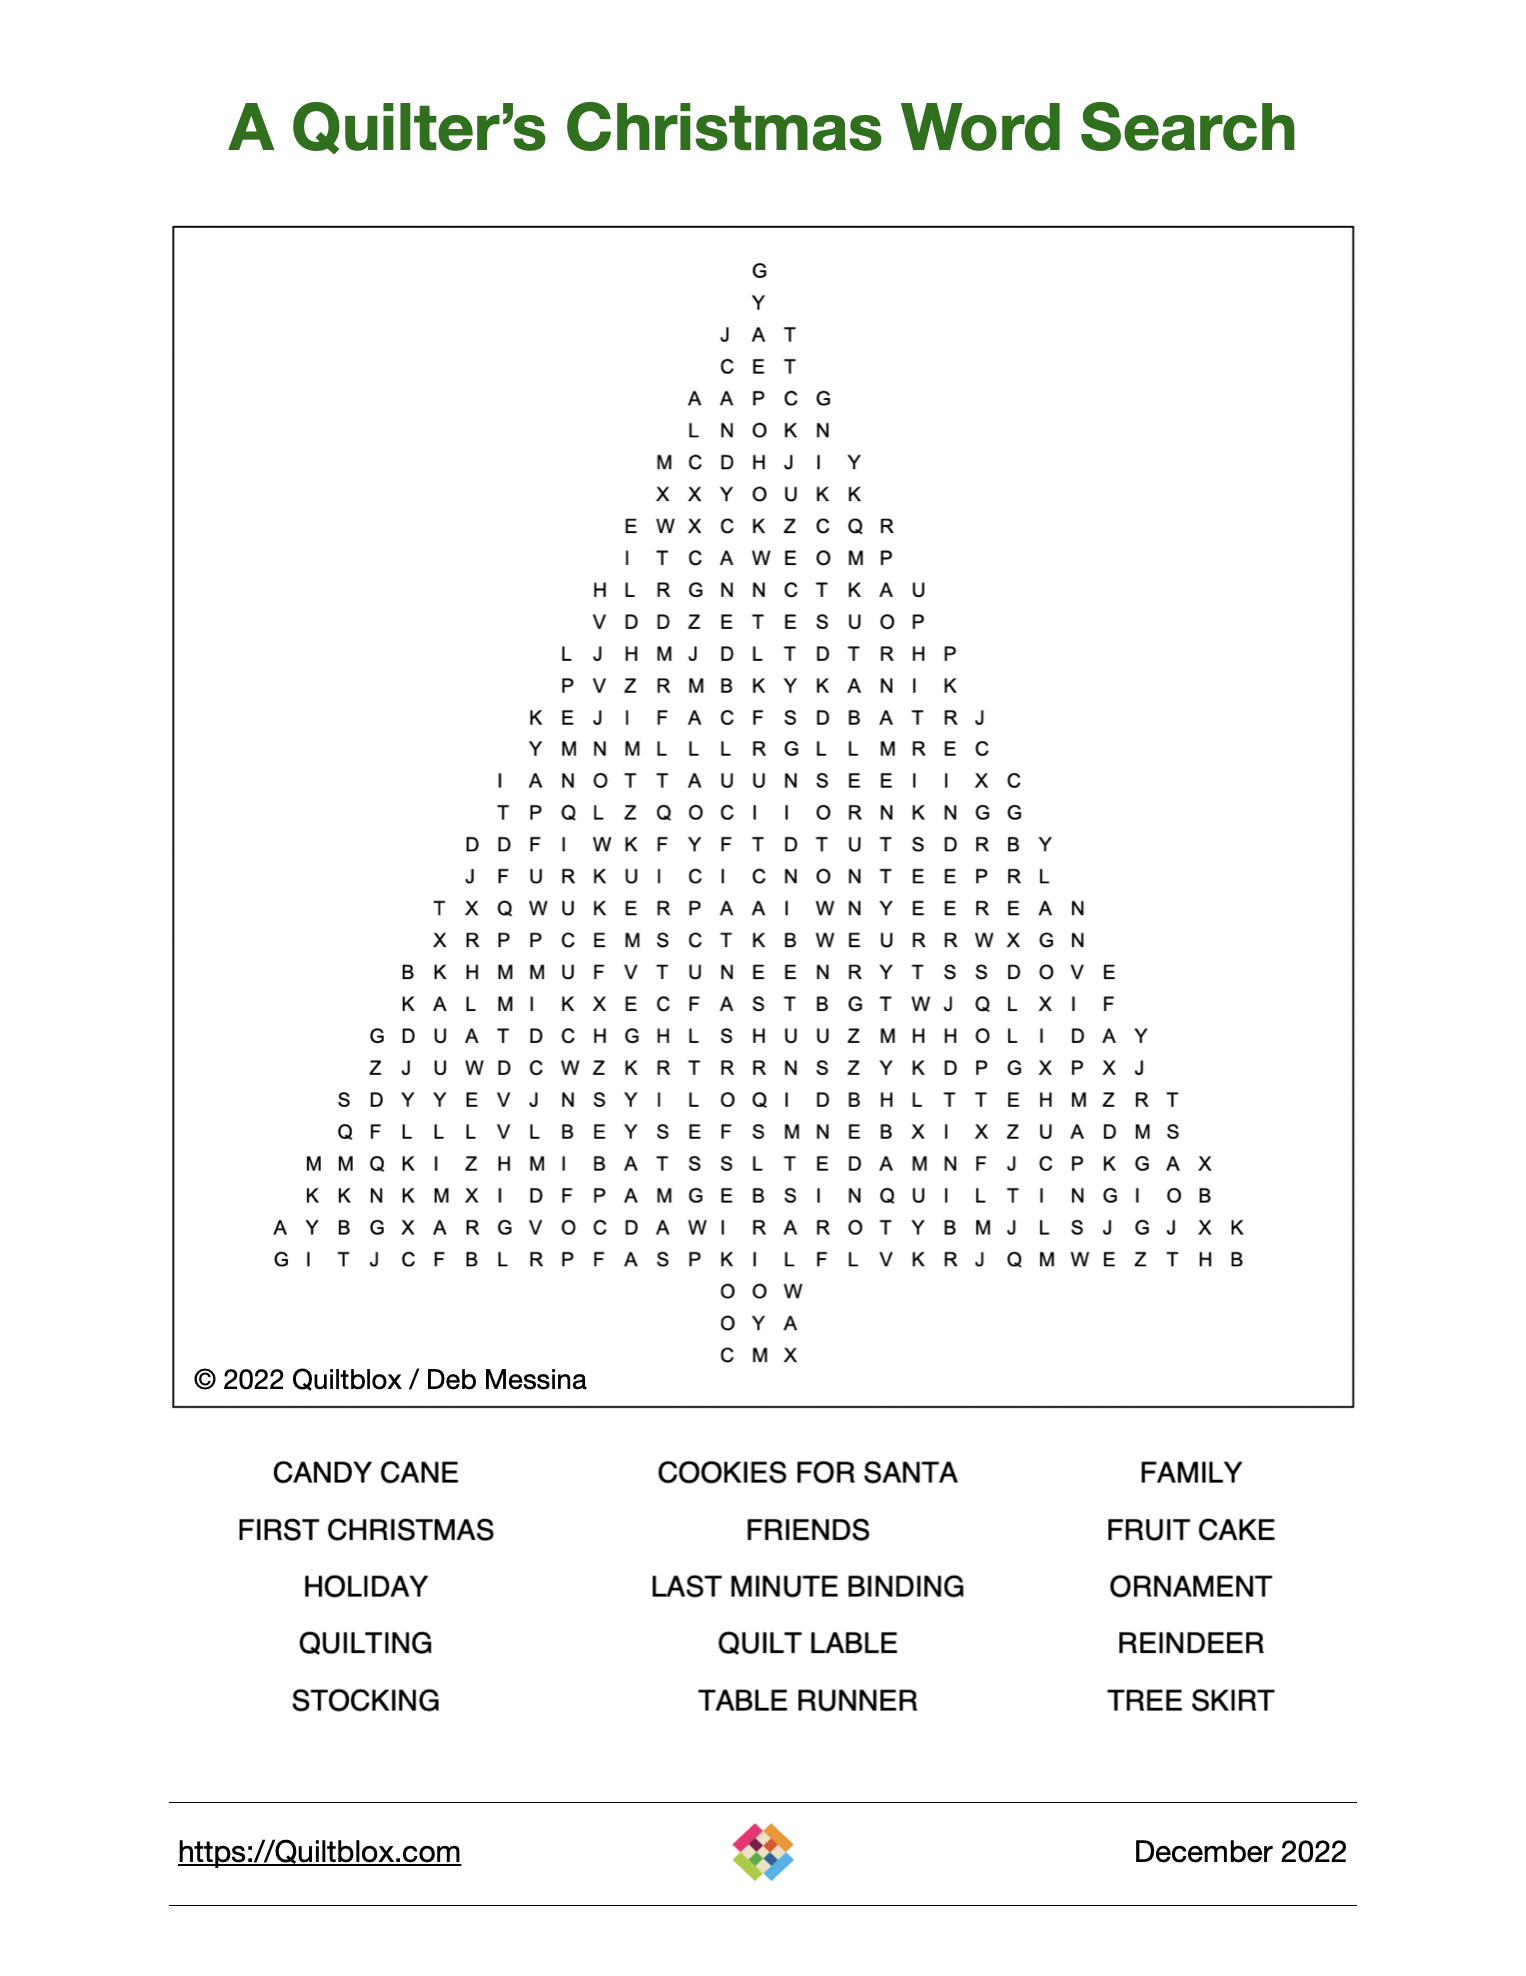 A Quilters Christmas Word Search - Image